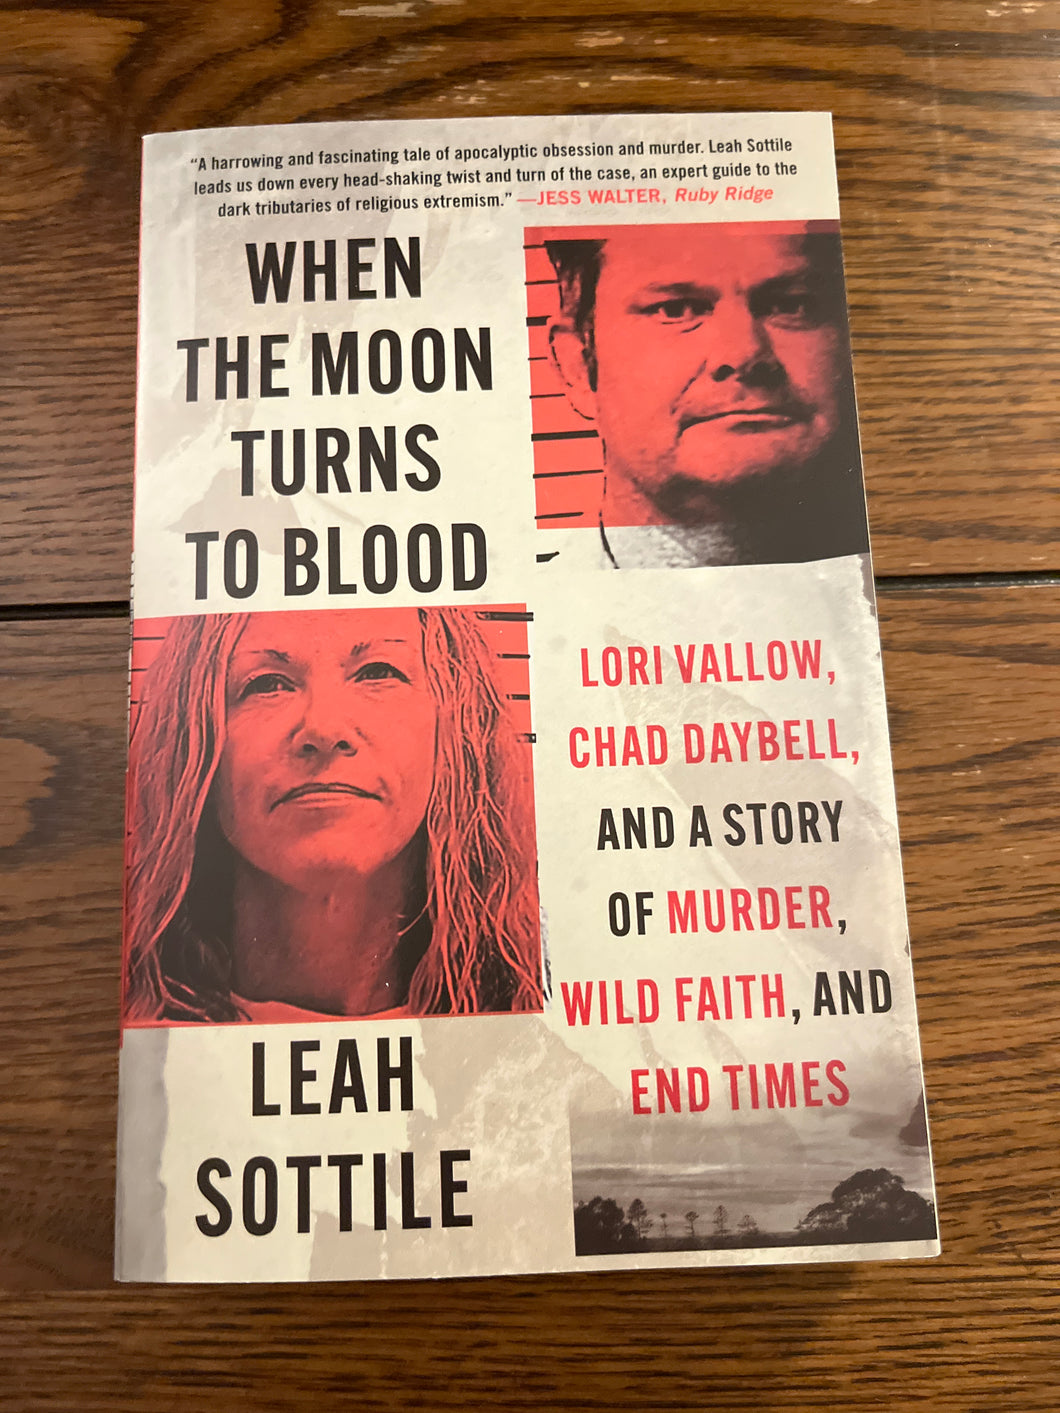 When The Moon Turns To Blood: Lori Vallow, Chad Daybell, And A Story Of Murder, Wild Faith, And End Times